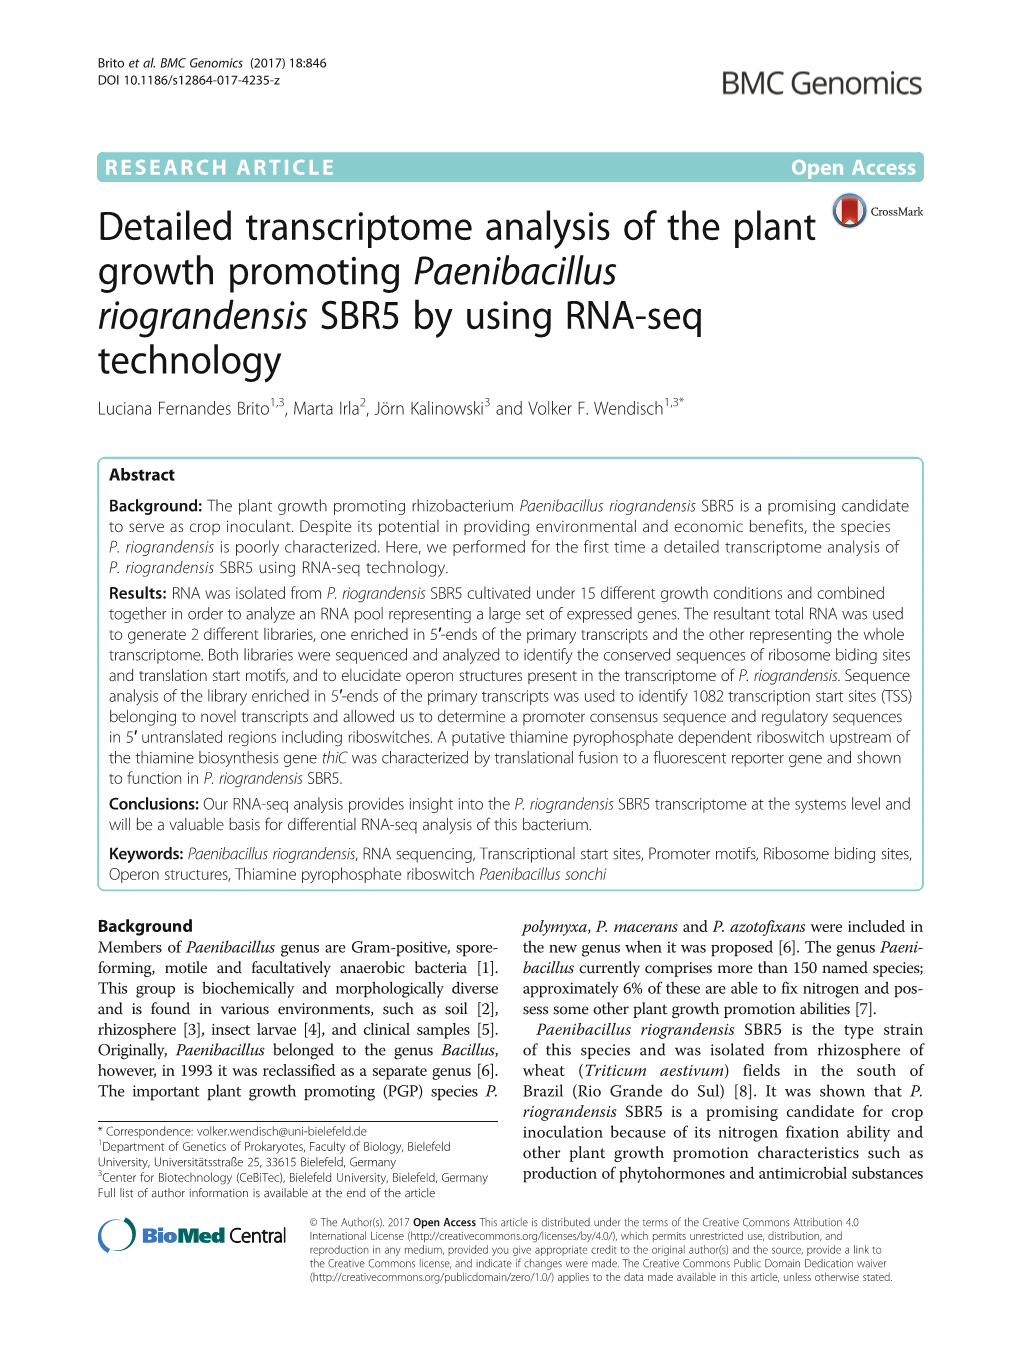 Detailed Transcriptome Analysis of the Plant Growth Promoting